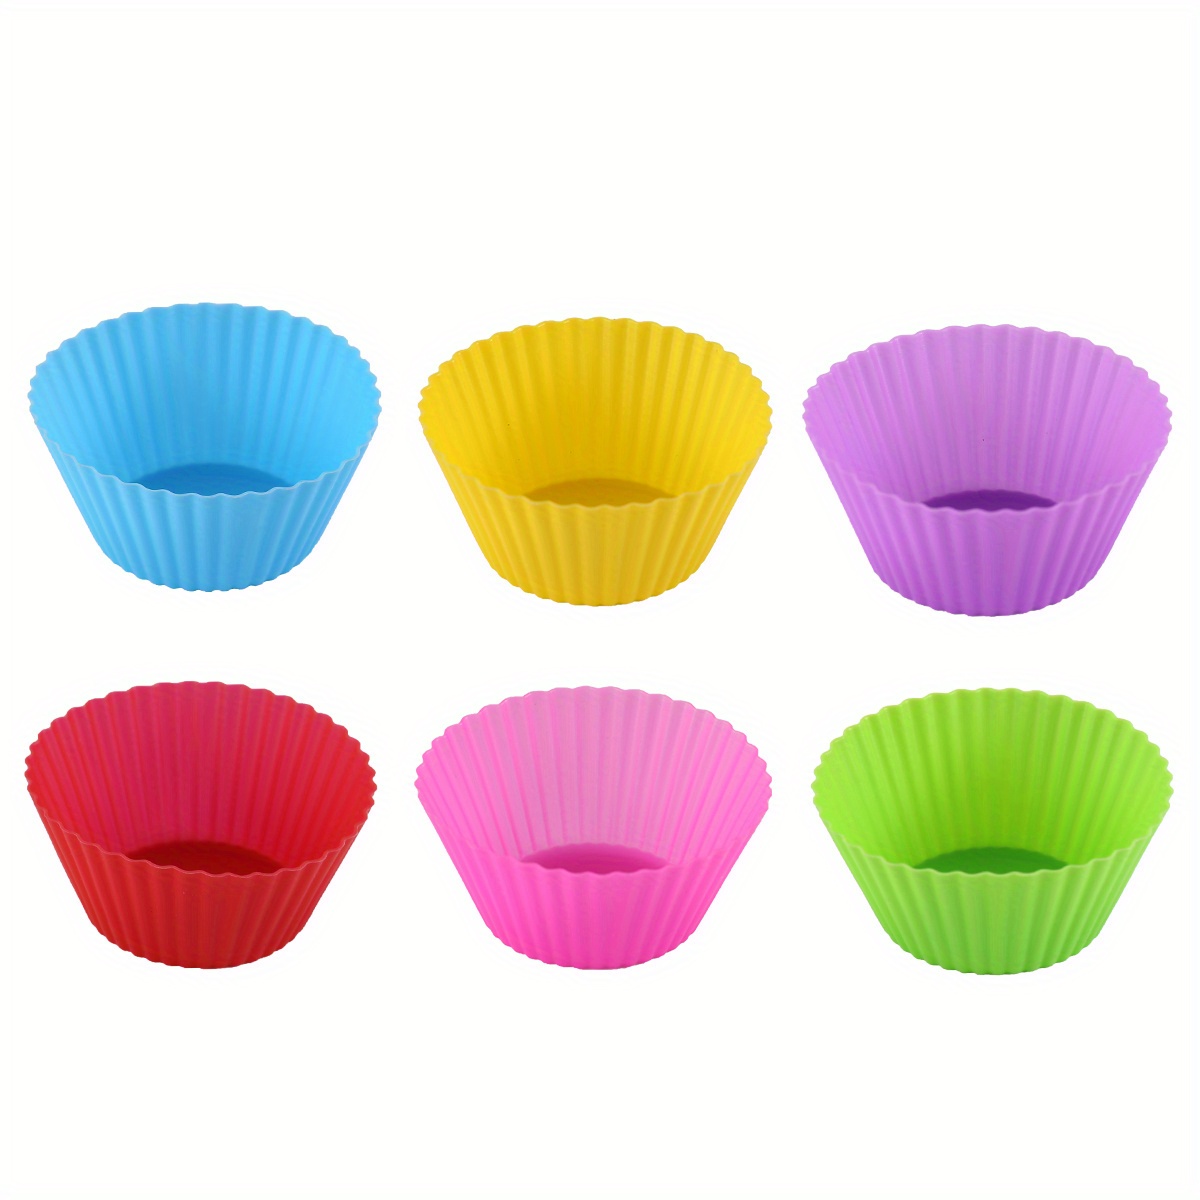 18 Pack Silicone Cups Baking Molds, Reusable Non Stick Silicone